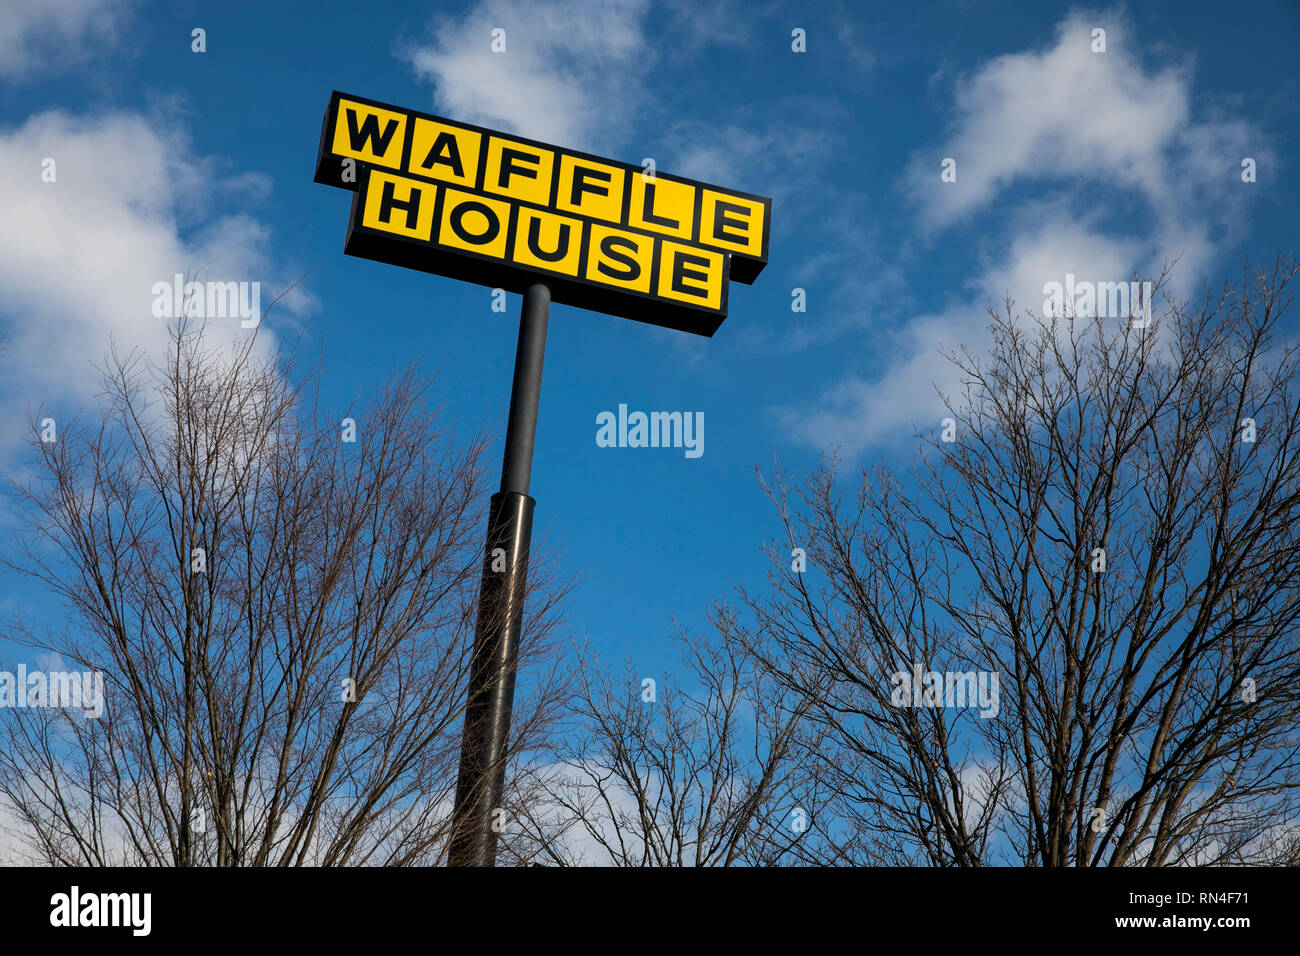 A logo sign outside of a Waffle House restaurant location in Martinsburg, West Virginia on February 13, 2019 Stock Photo